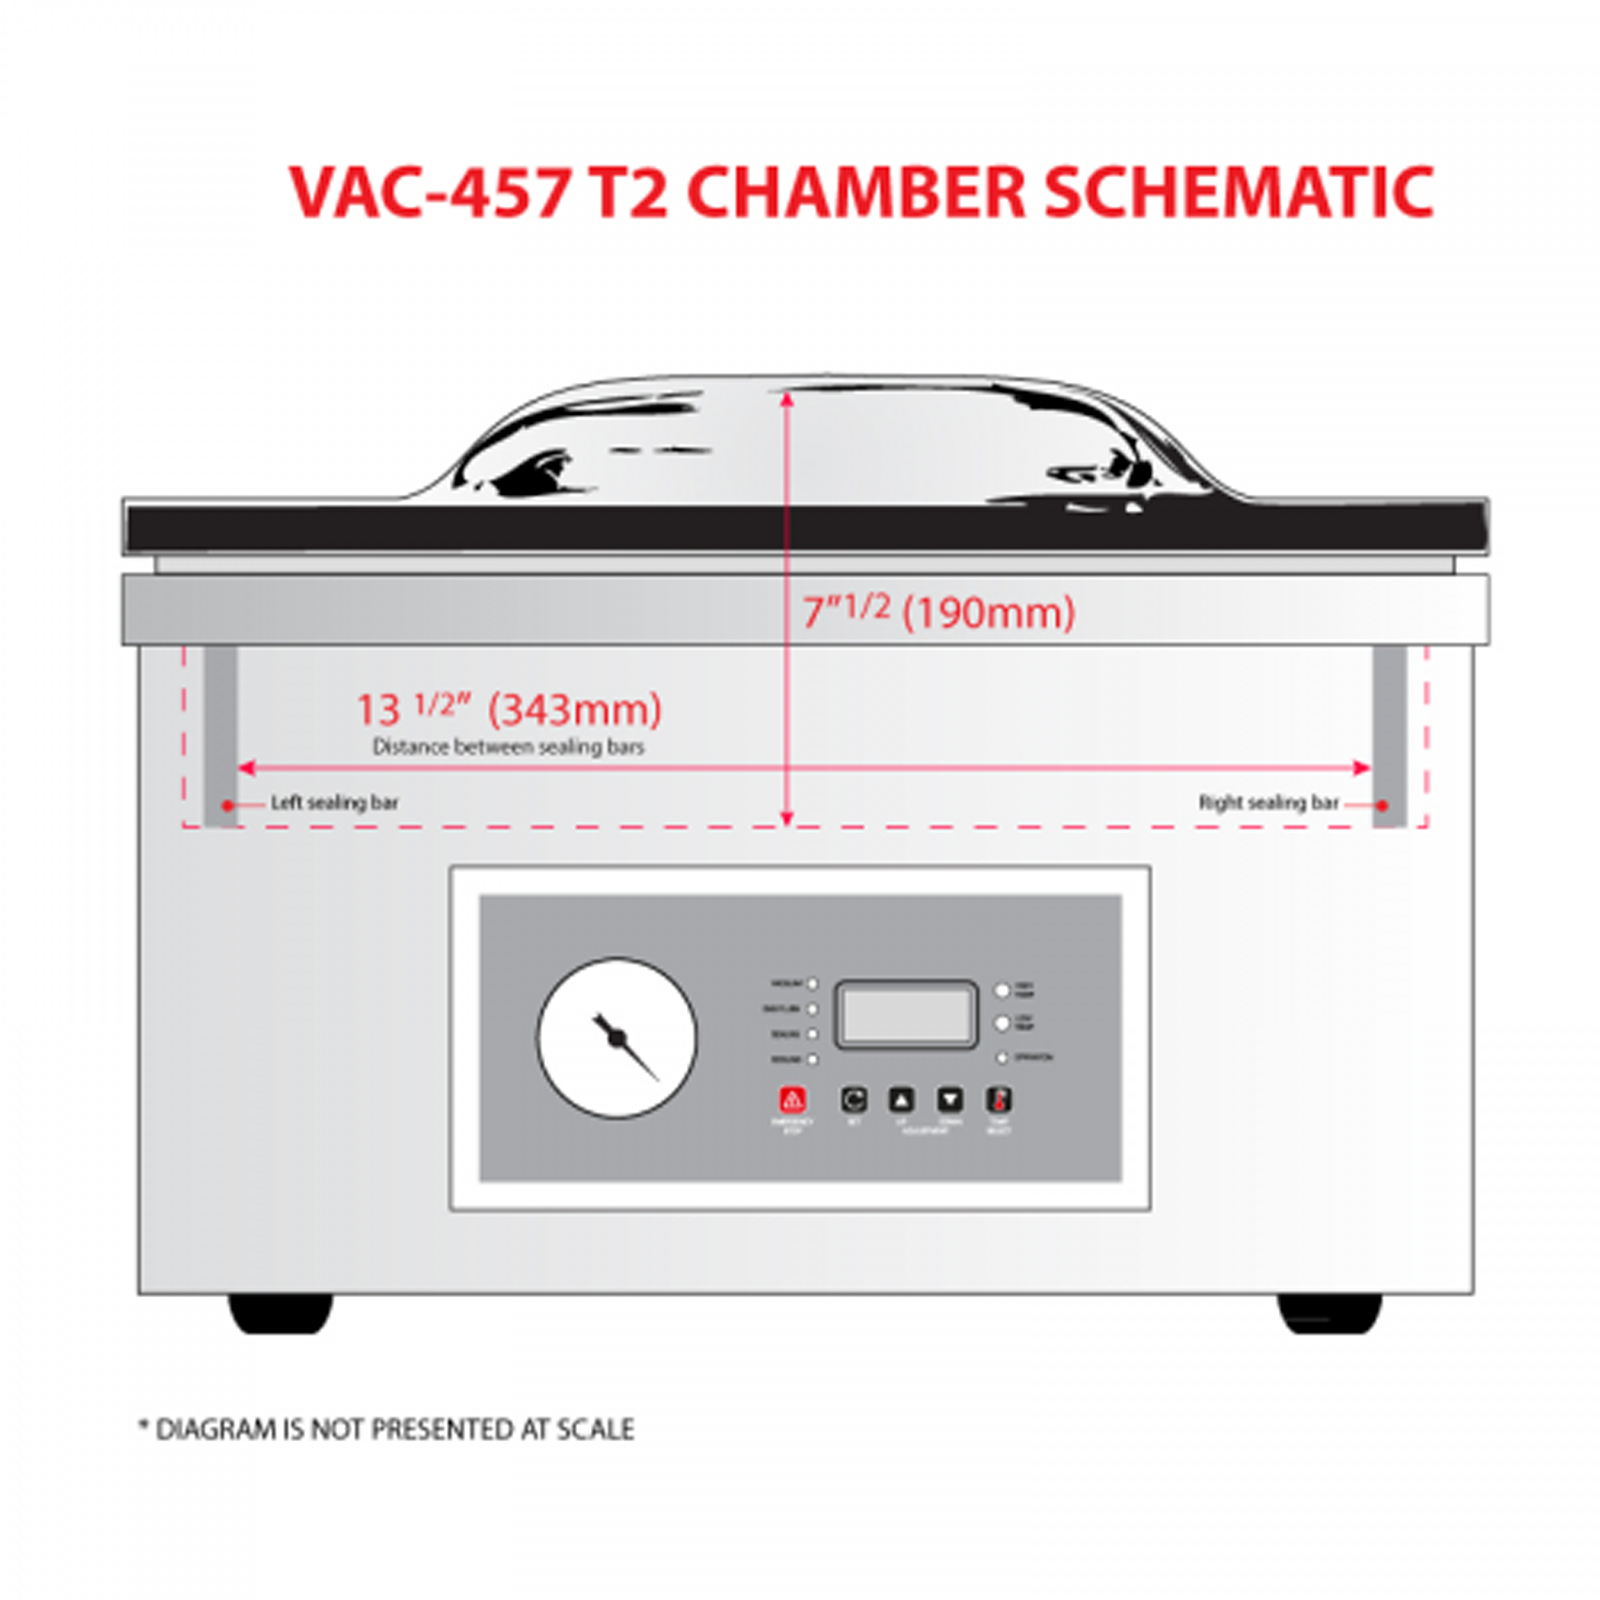 A diagram not presented in scale show a front view with the measurements of the JORES TECHNOLOGIES® vacuum chamber. Text reads: VAC-457-T2 Chamber Schematics. Distance between left seal bar to right seal bar: 13